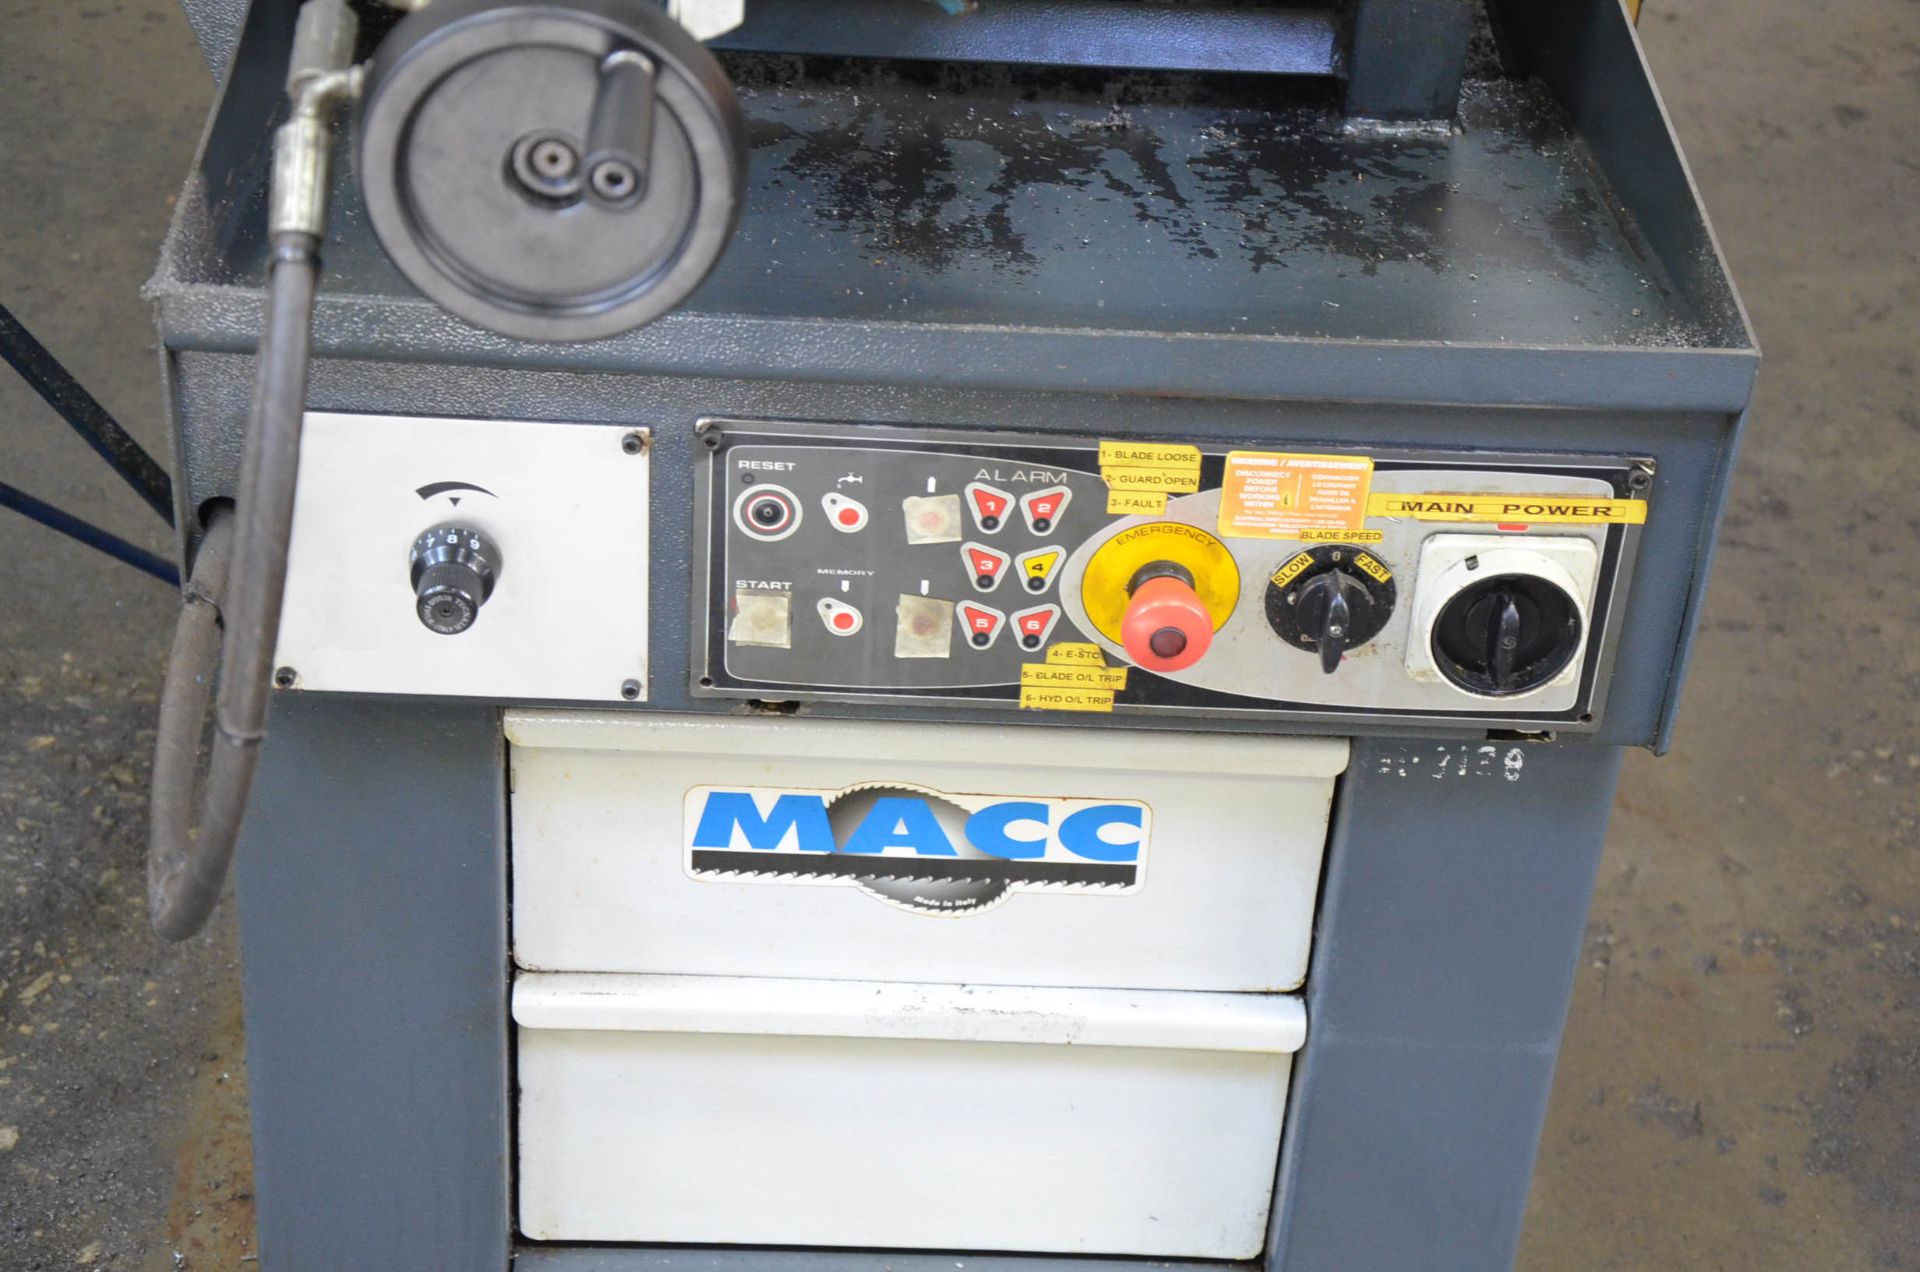 MACC (2008) SPECIAL 400 SI 16" METAL CUTTING HORIZONTAL BAND SAW WITH MITER CAPABILITY, COOLANT, - Image 4 of 6